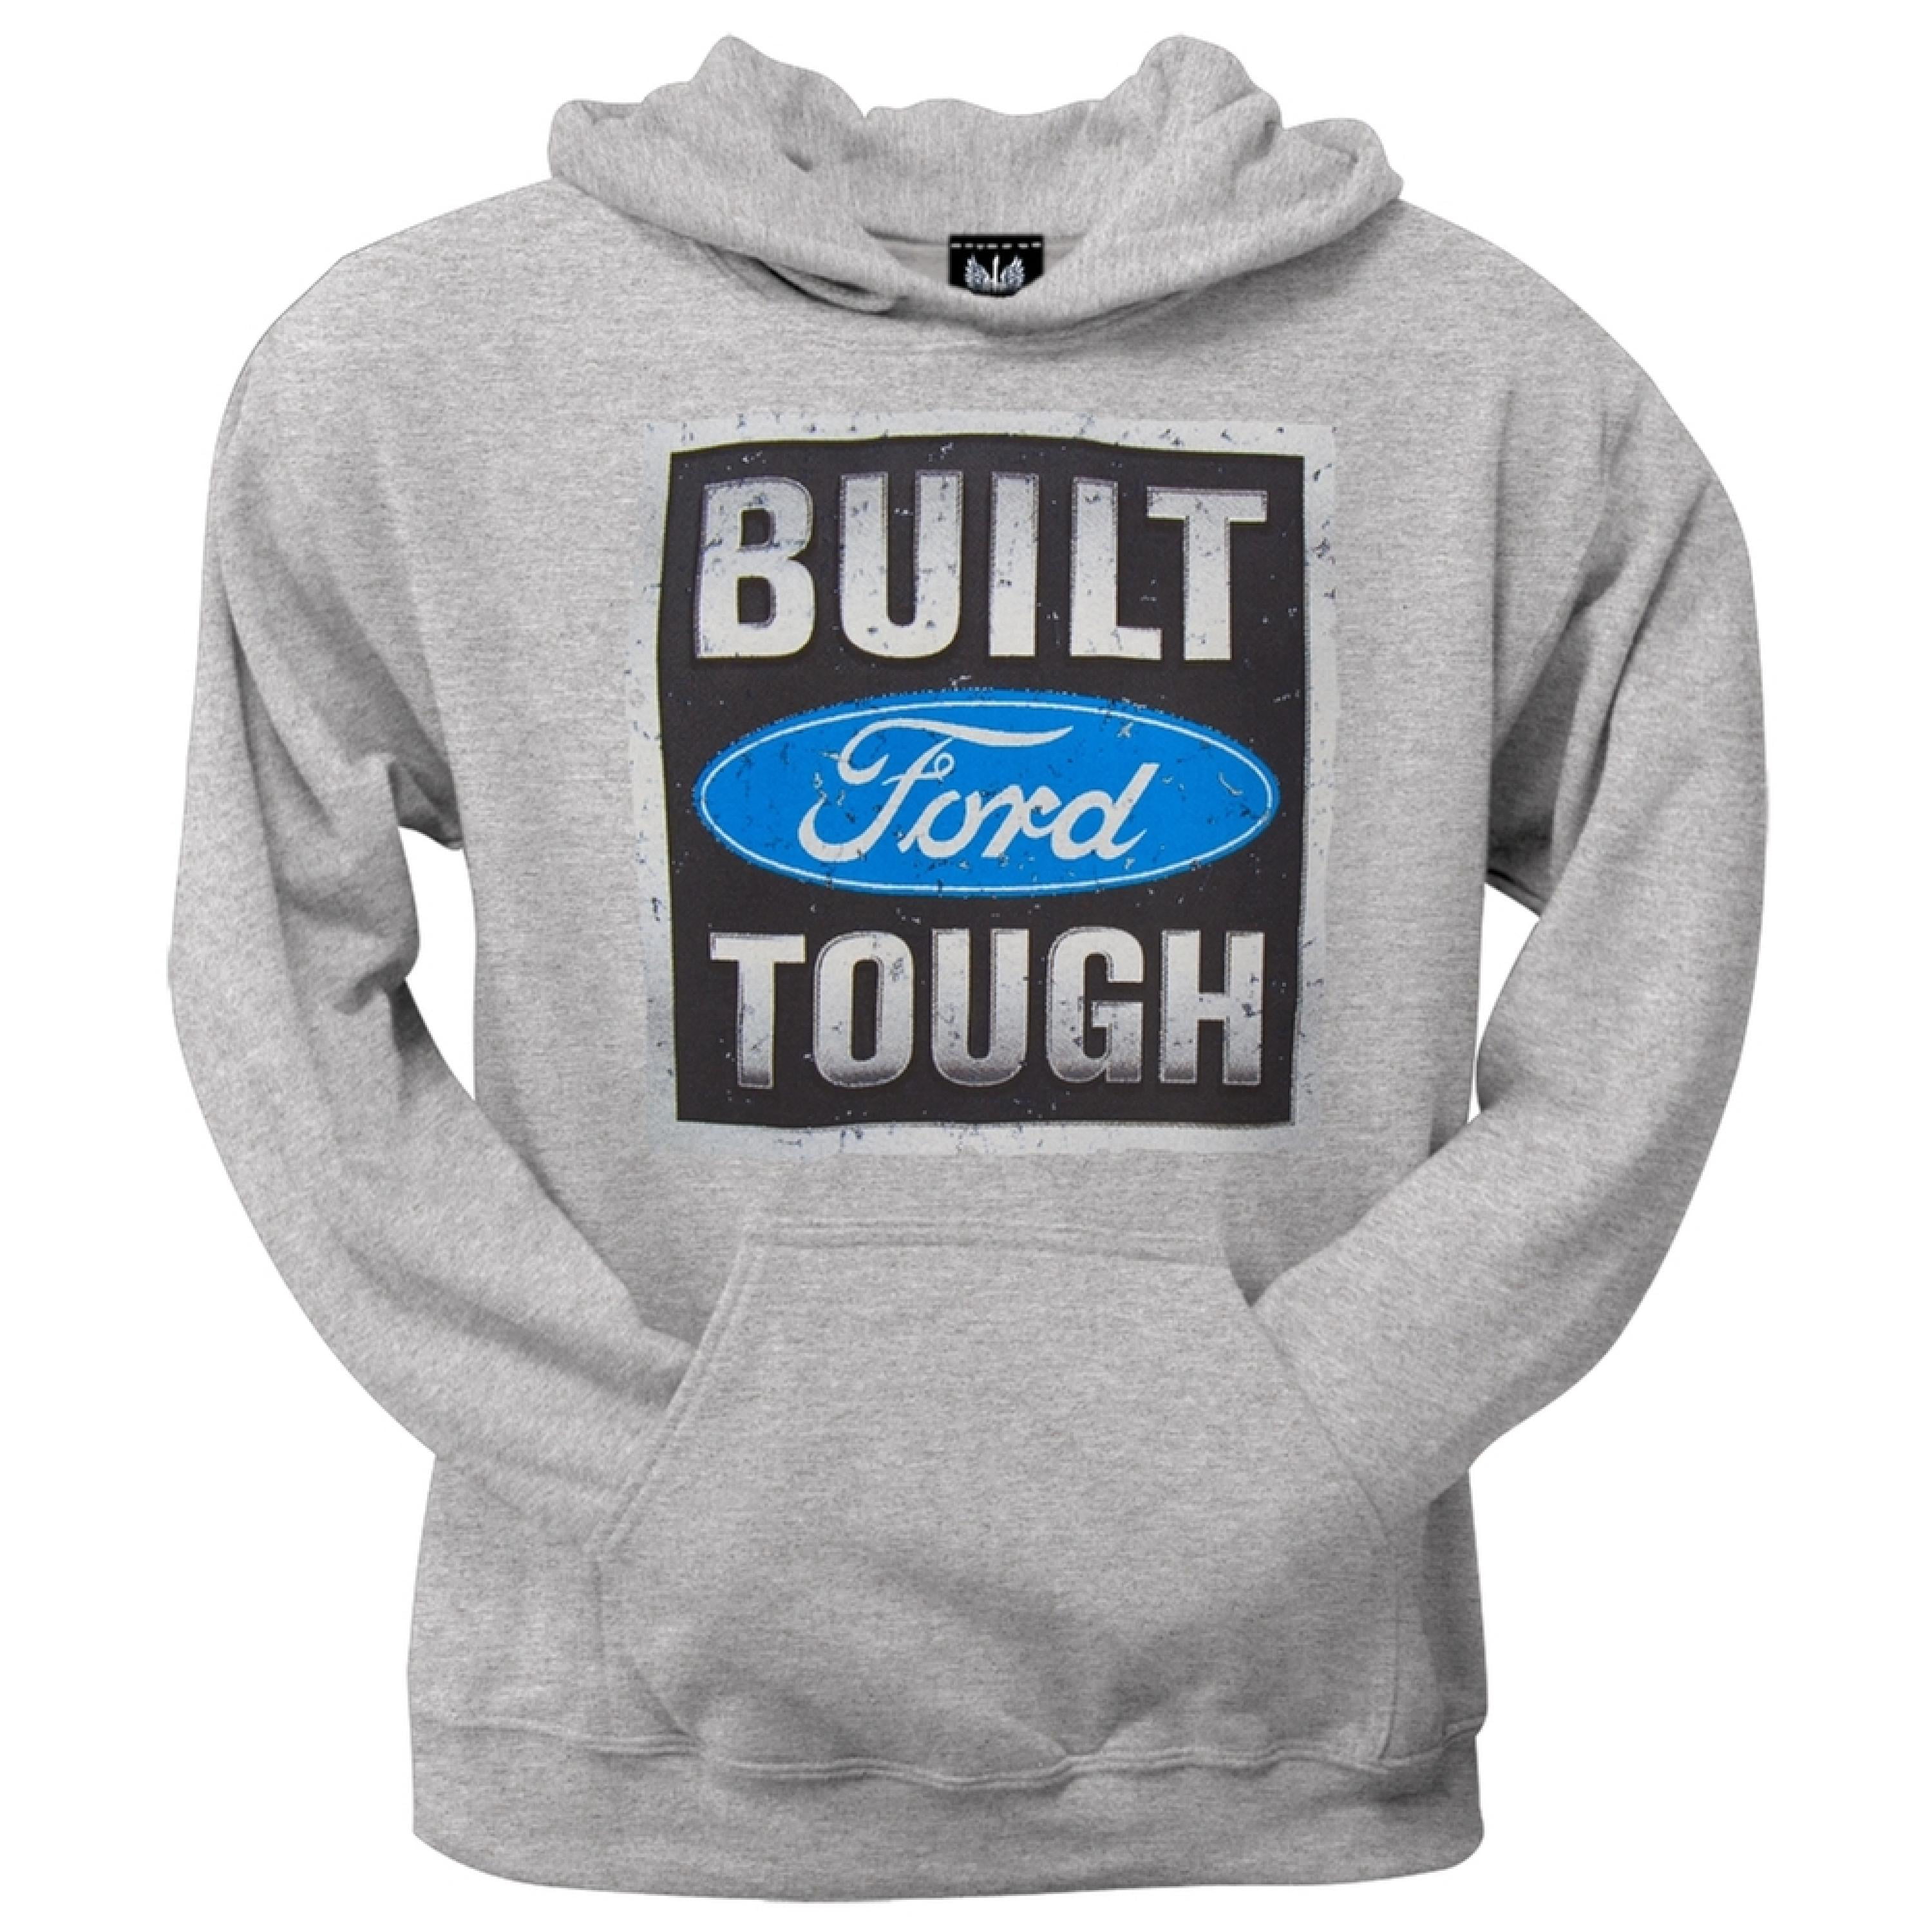 Built Tough Stamp Pullover Hoodie Ford